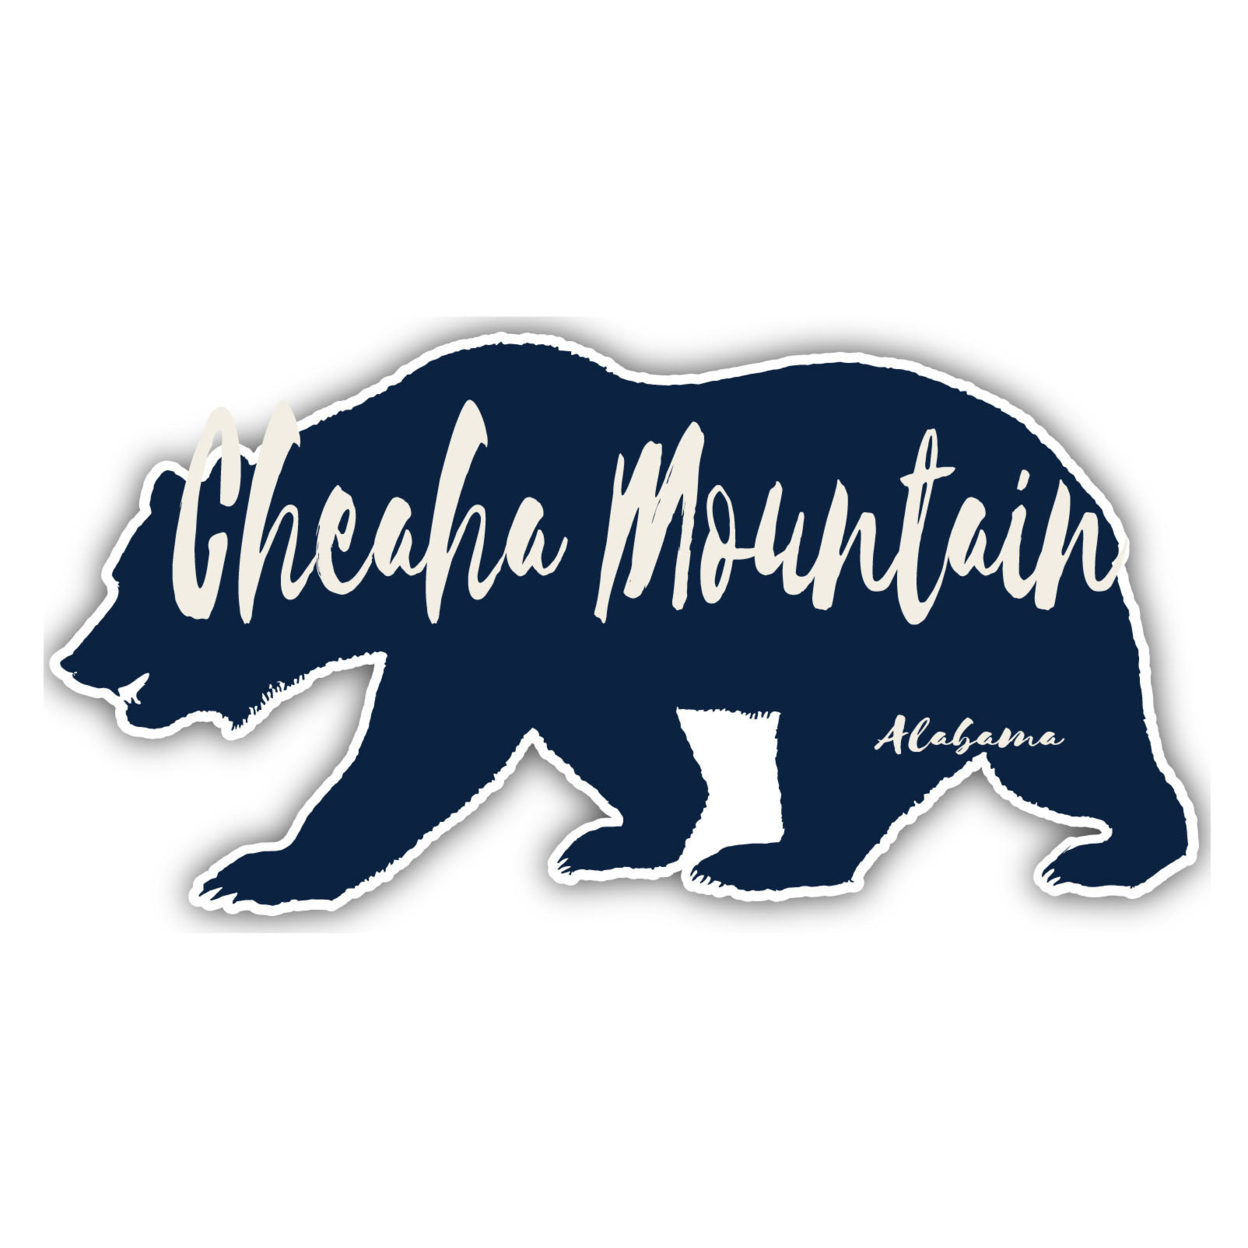 Cheaha Mountain Alabama Souvenir Decorative Stickers (Choose Theme And Size) - 4-Pack, 6-Inch, Bear